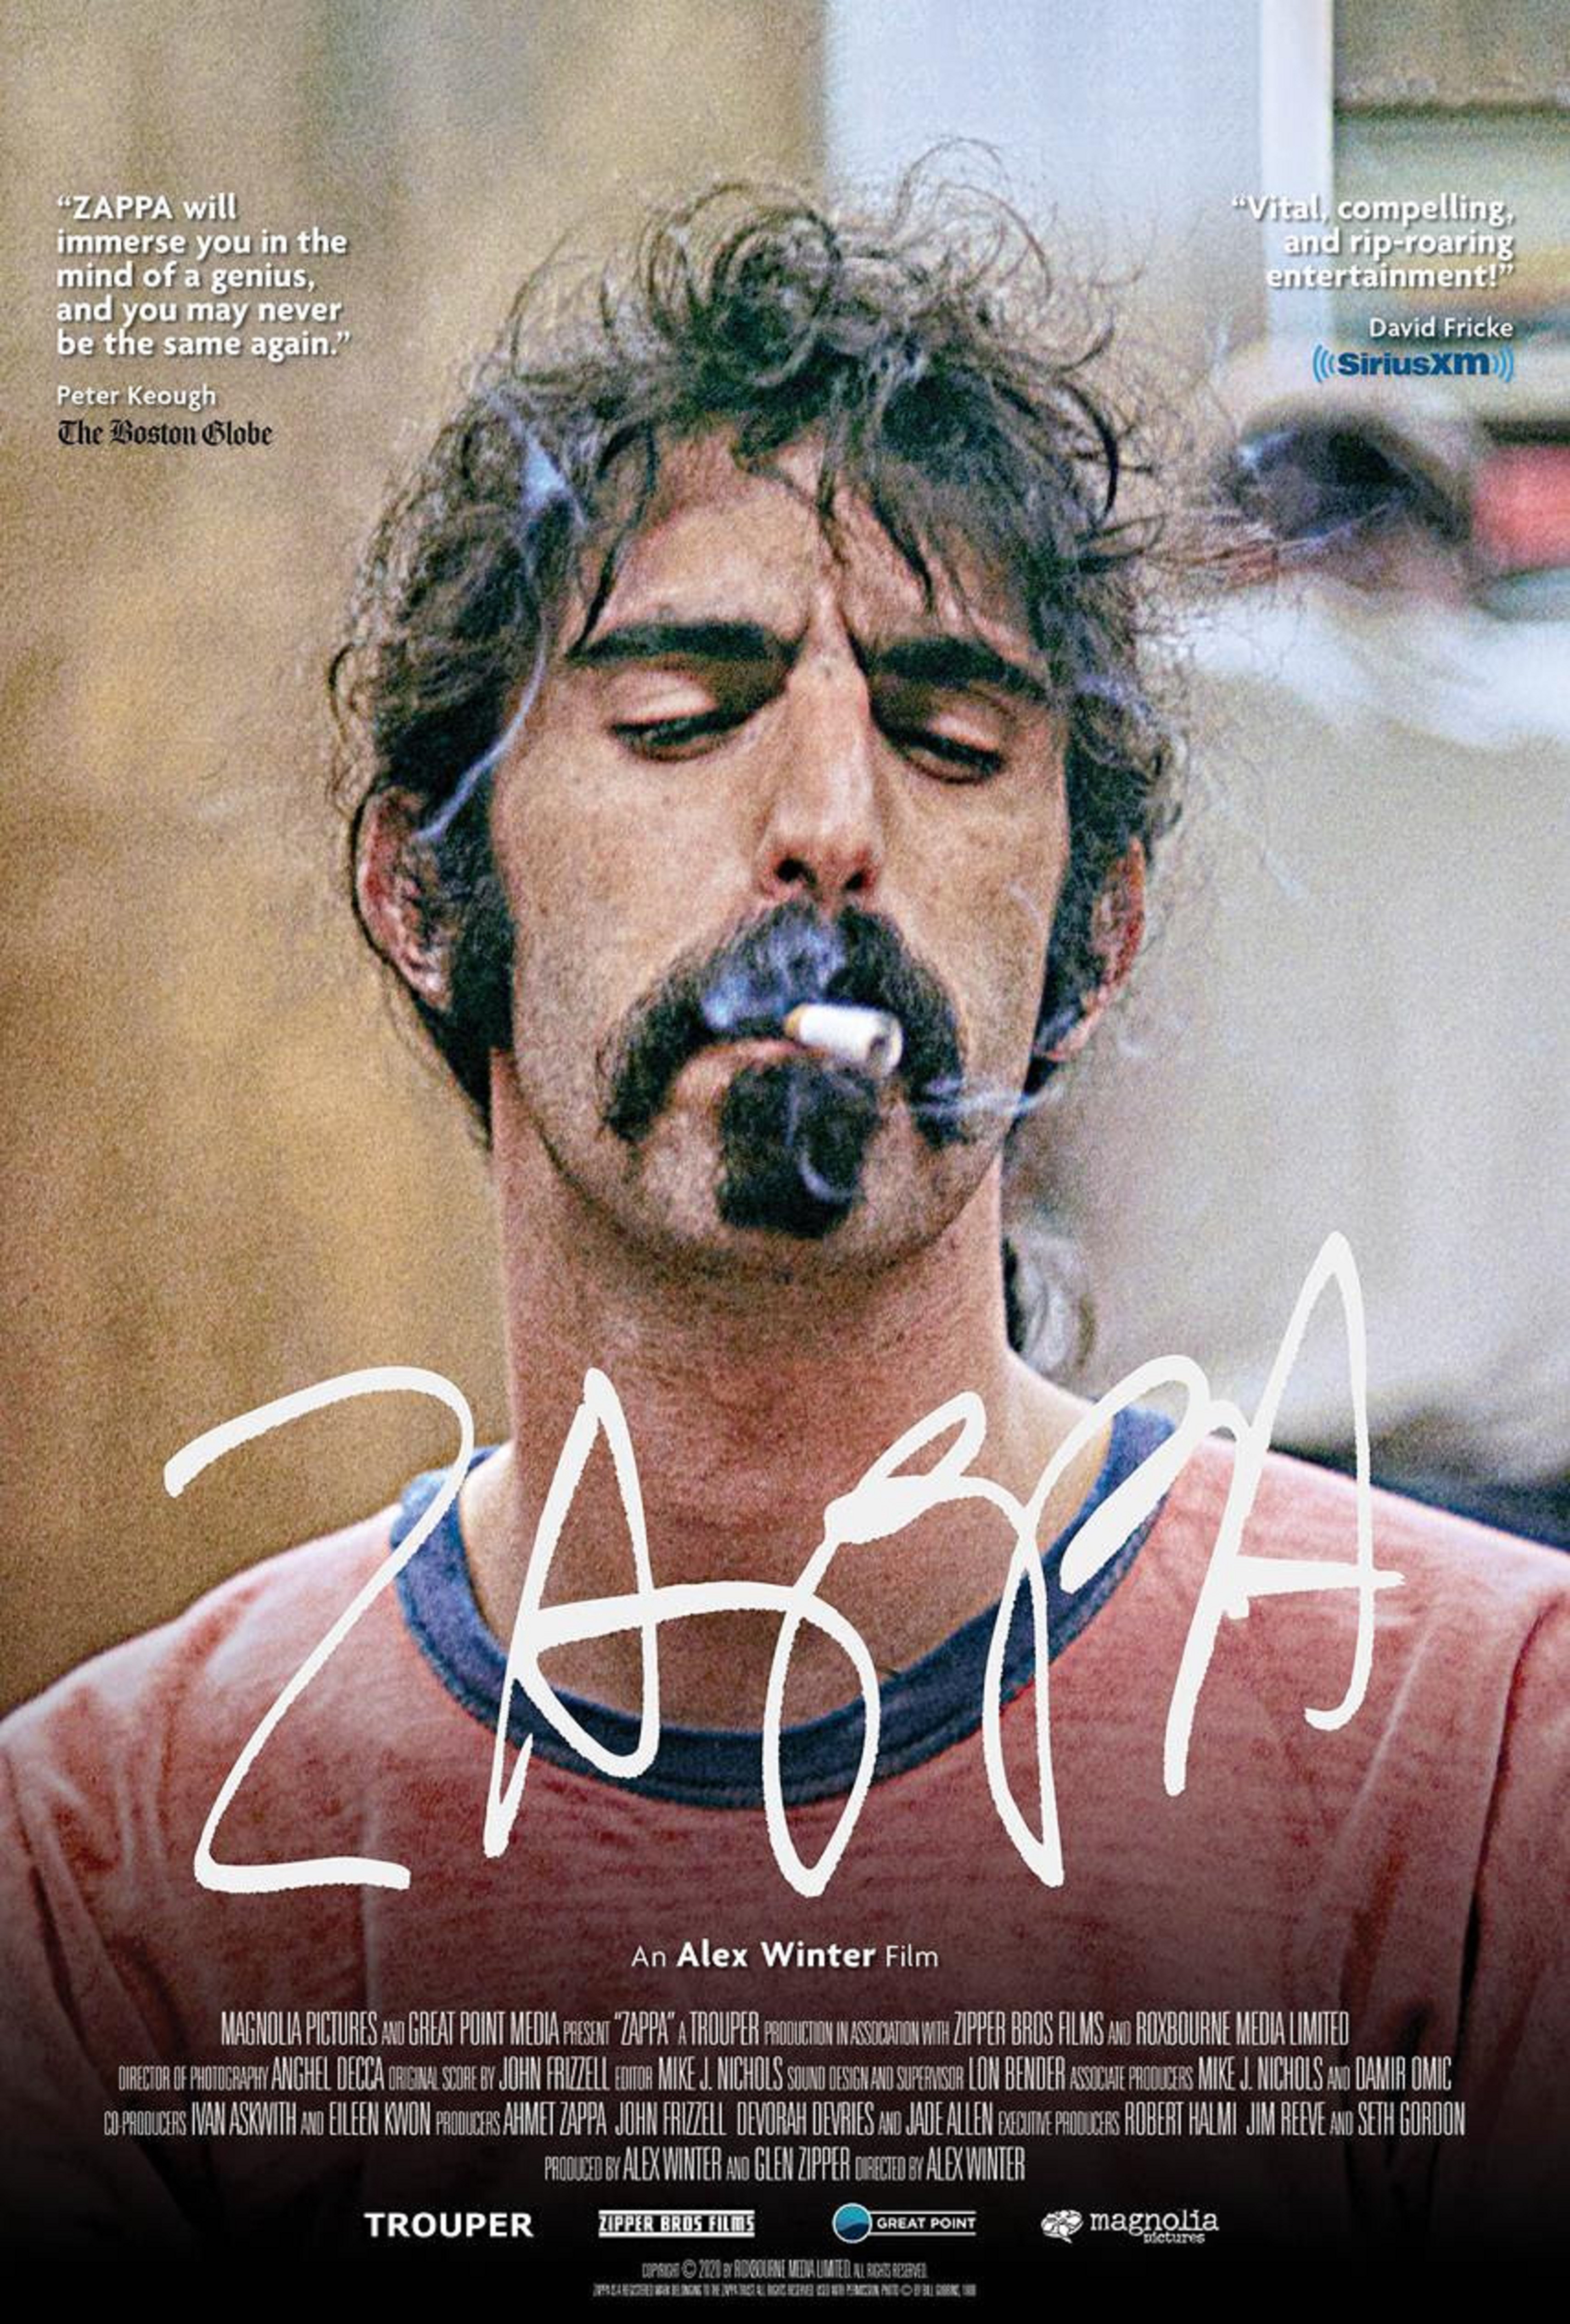 Magnolia Pictures will release ZAPPA everywhere November 27th, 2020